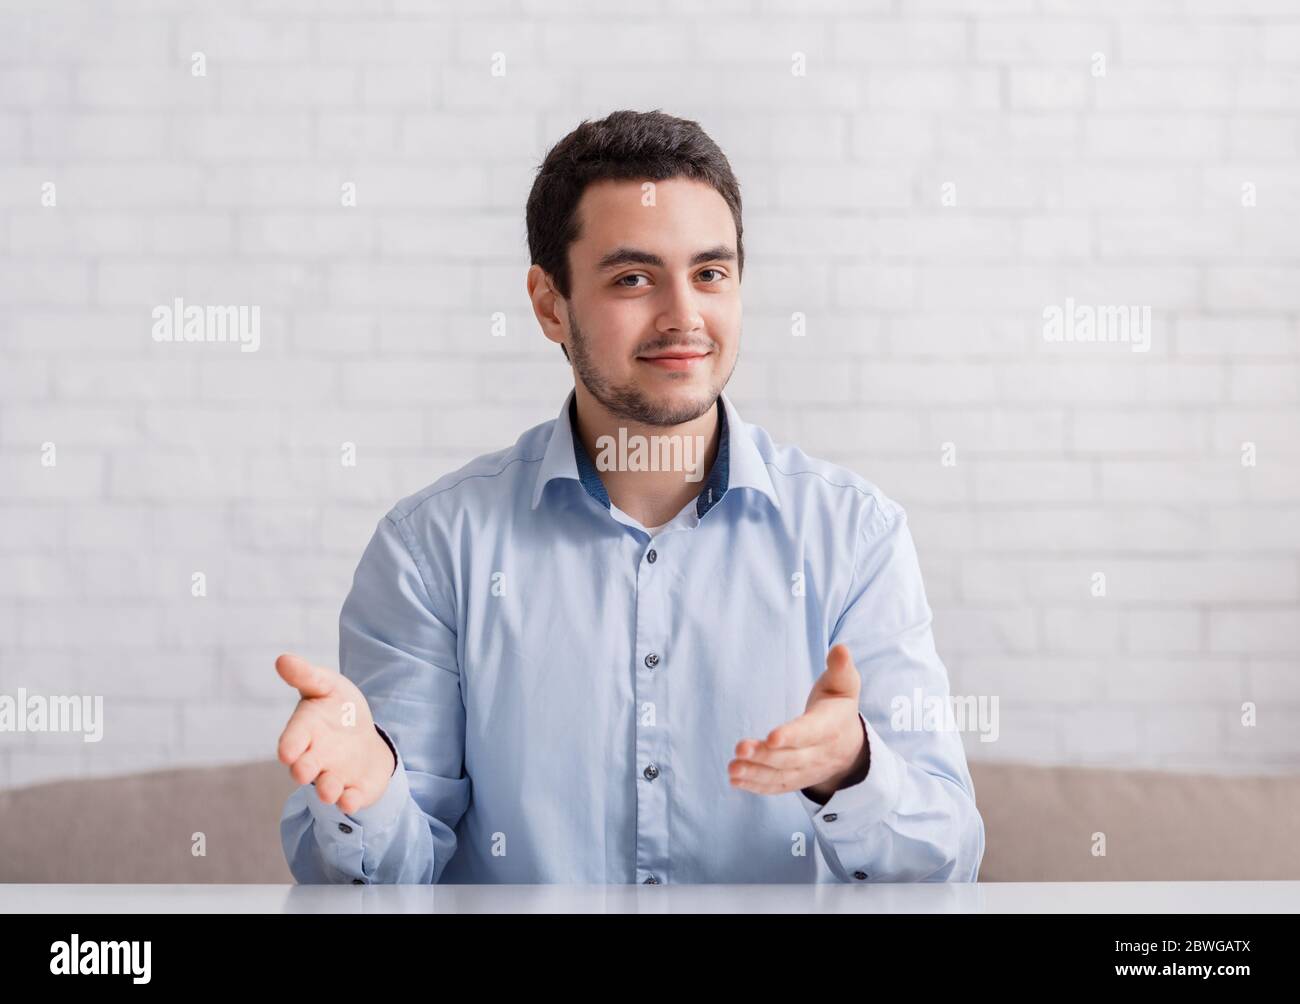 Friendly man point hands to empty space, sitting on couch in interior Stock Photo